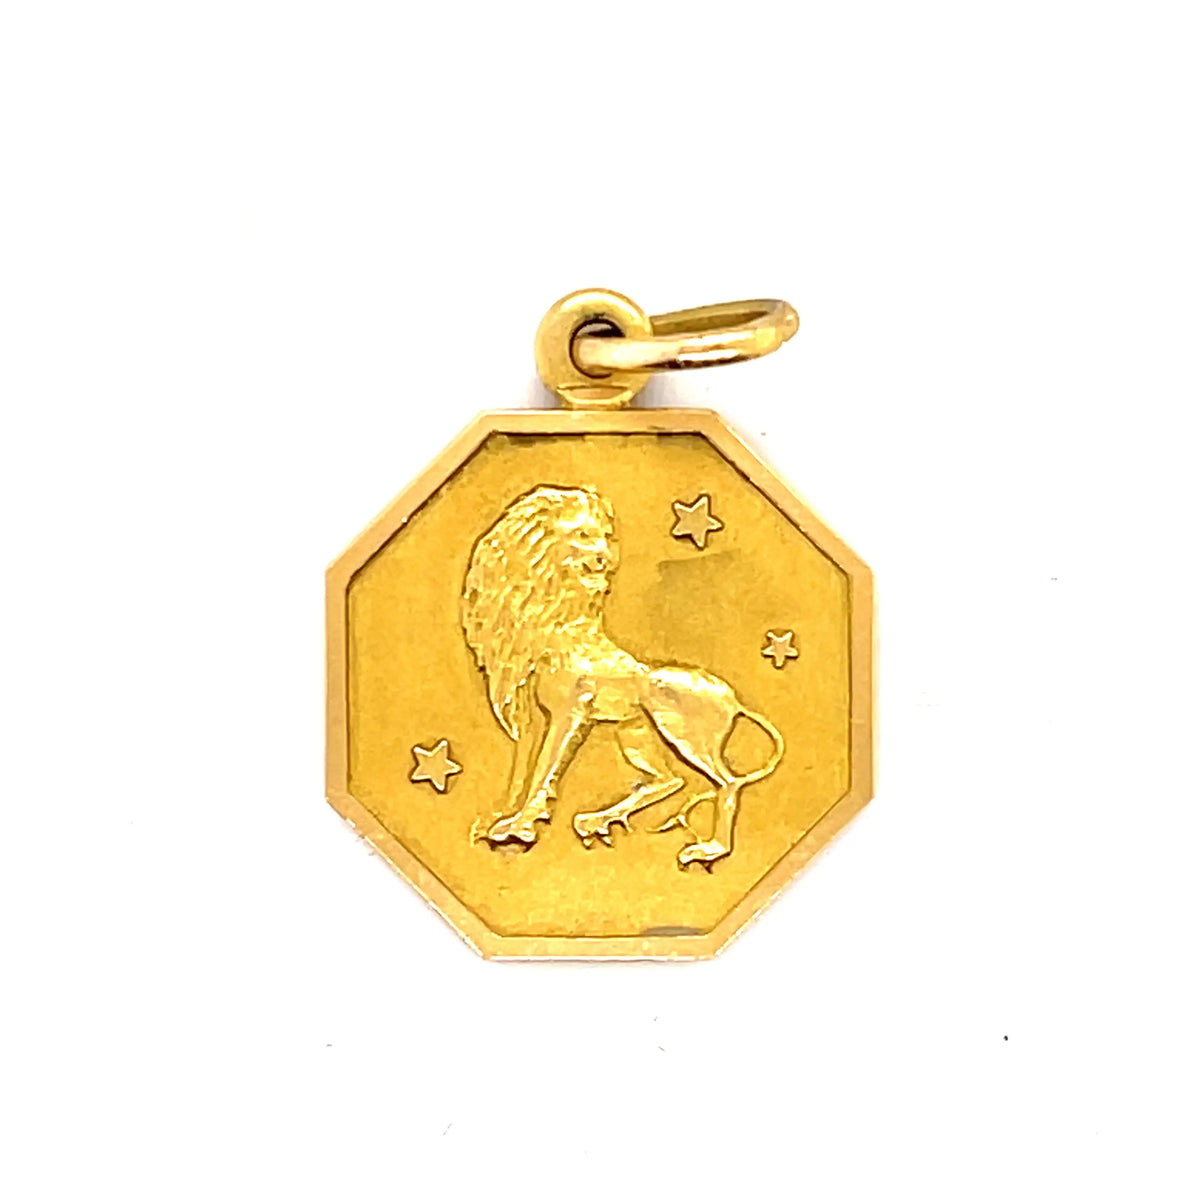 18k yellow gold griffin pendant  Great on its own or stacked with other charms.  One of a kind  The griffin is used to denote strength and military courage and leadership. Griffins are portrayed with the rear body of a lion, an eagle&#39;s head with erect ears, a feathered breast, and the forelegs of an eagle, including claws. These features indicate a combination of intelligence and strength.